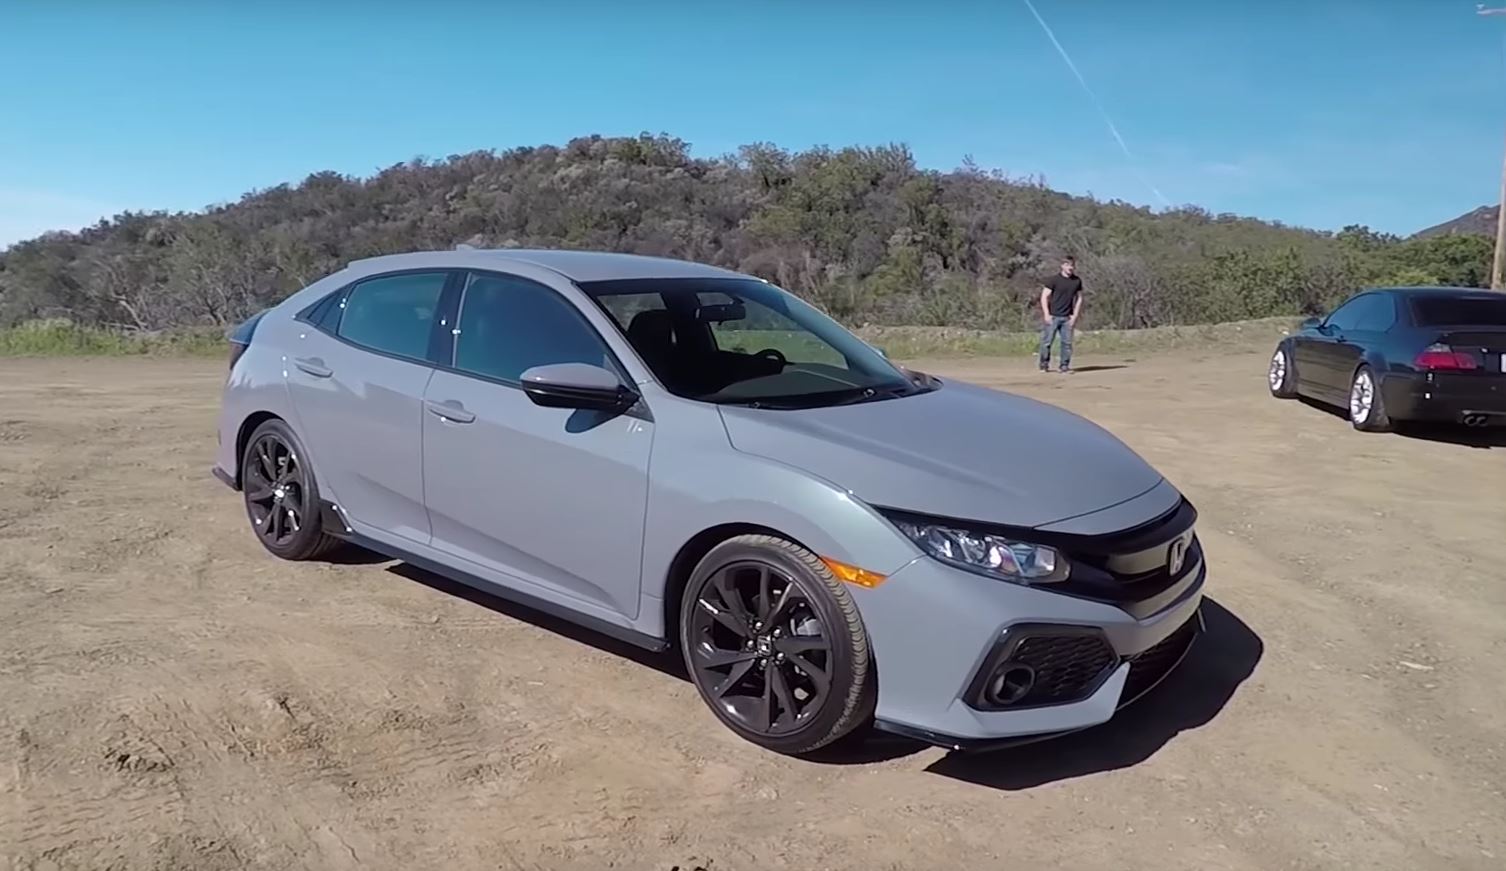 2017 Honda Civic Hatchback With Manual Gets Smoking Tire